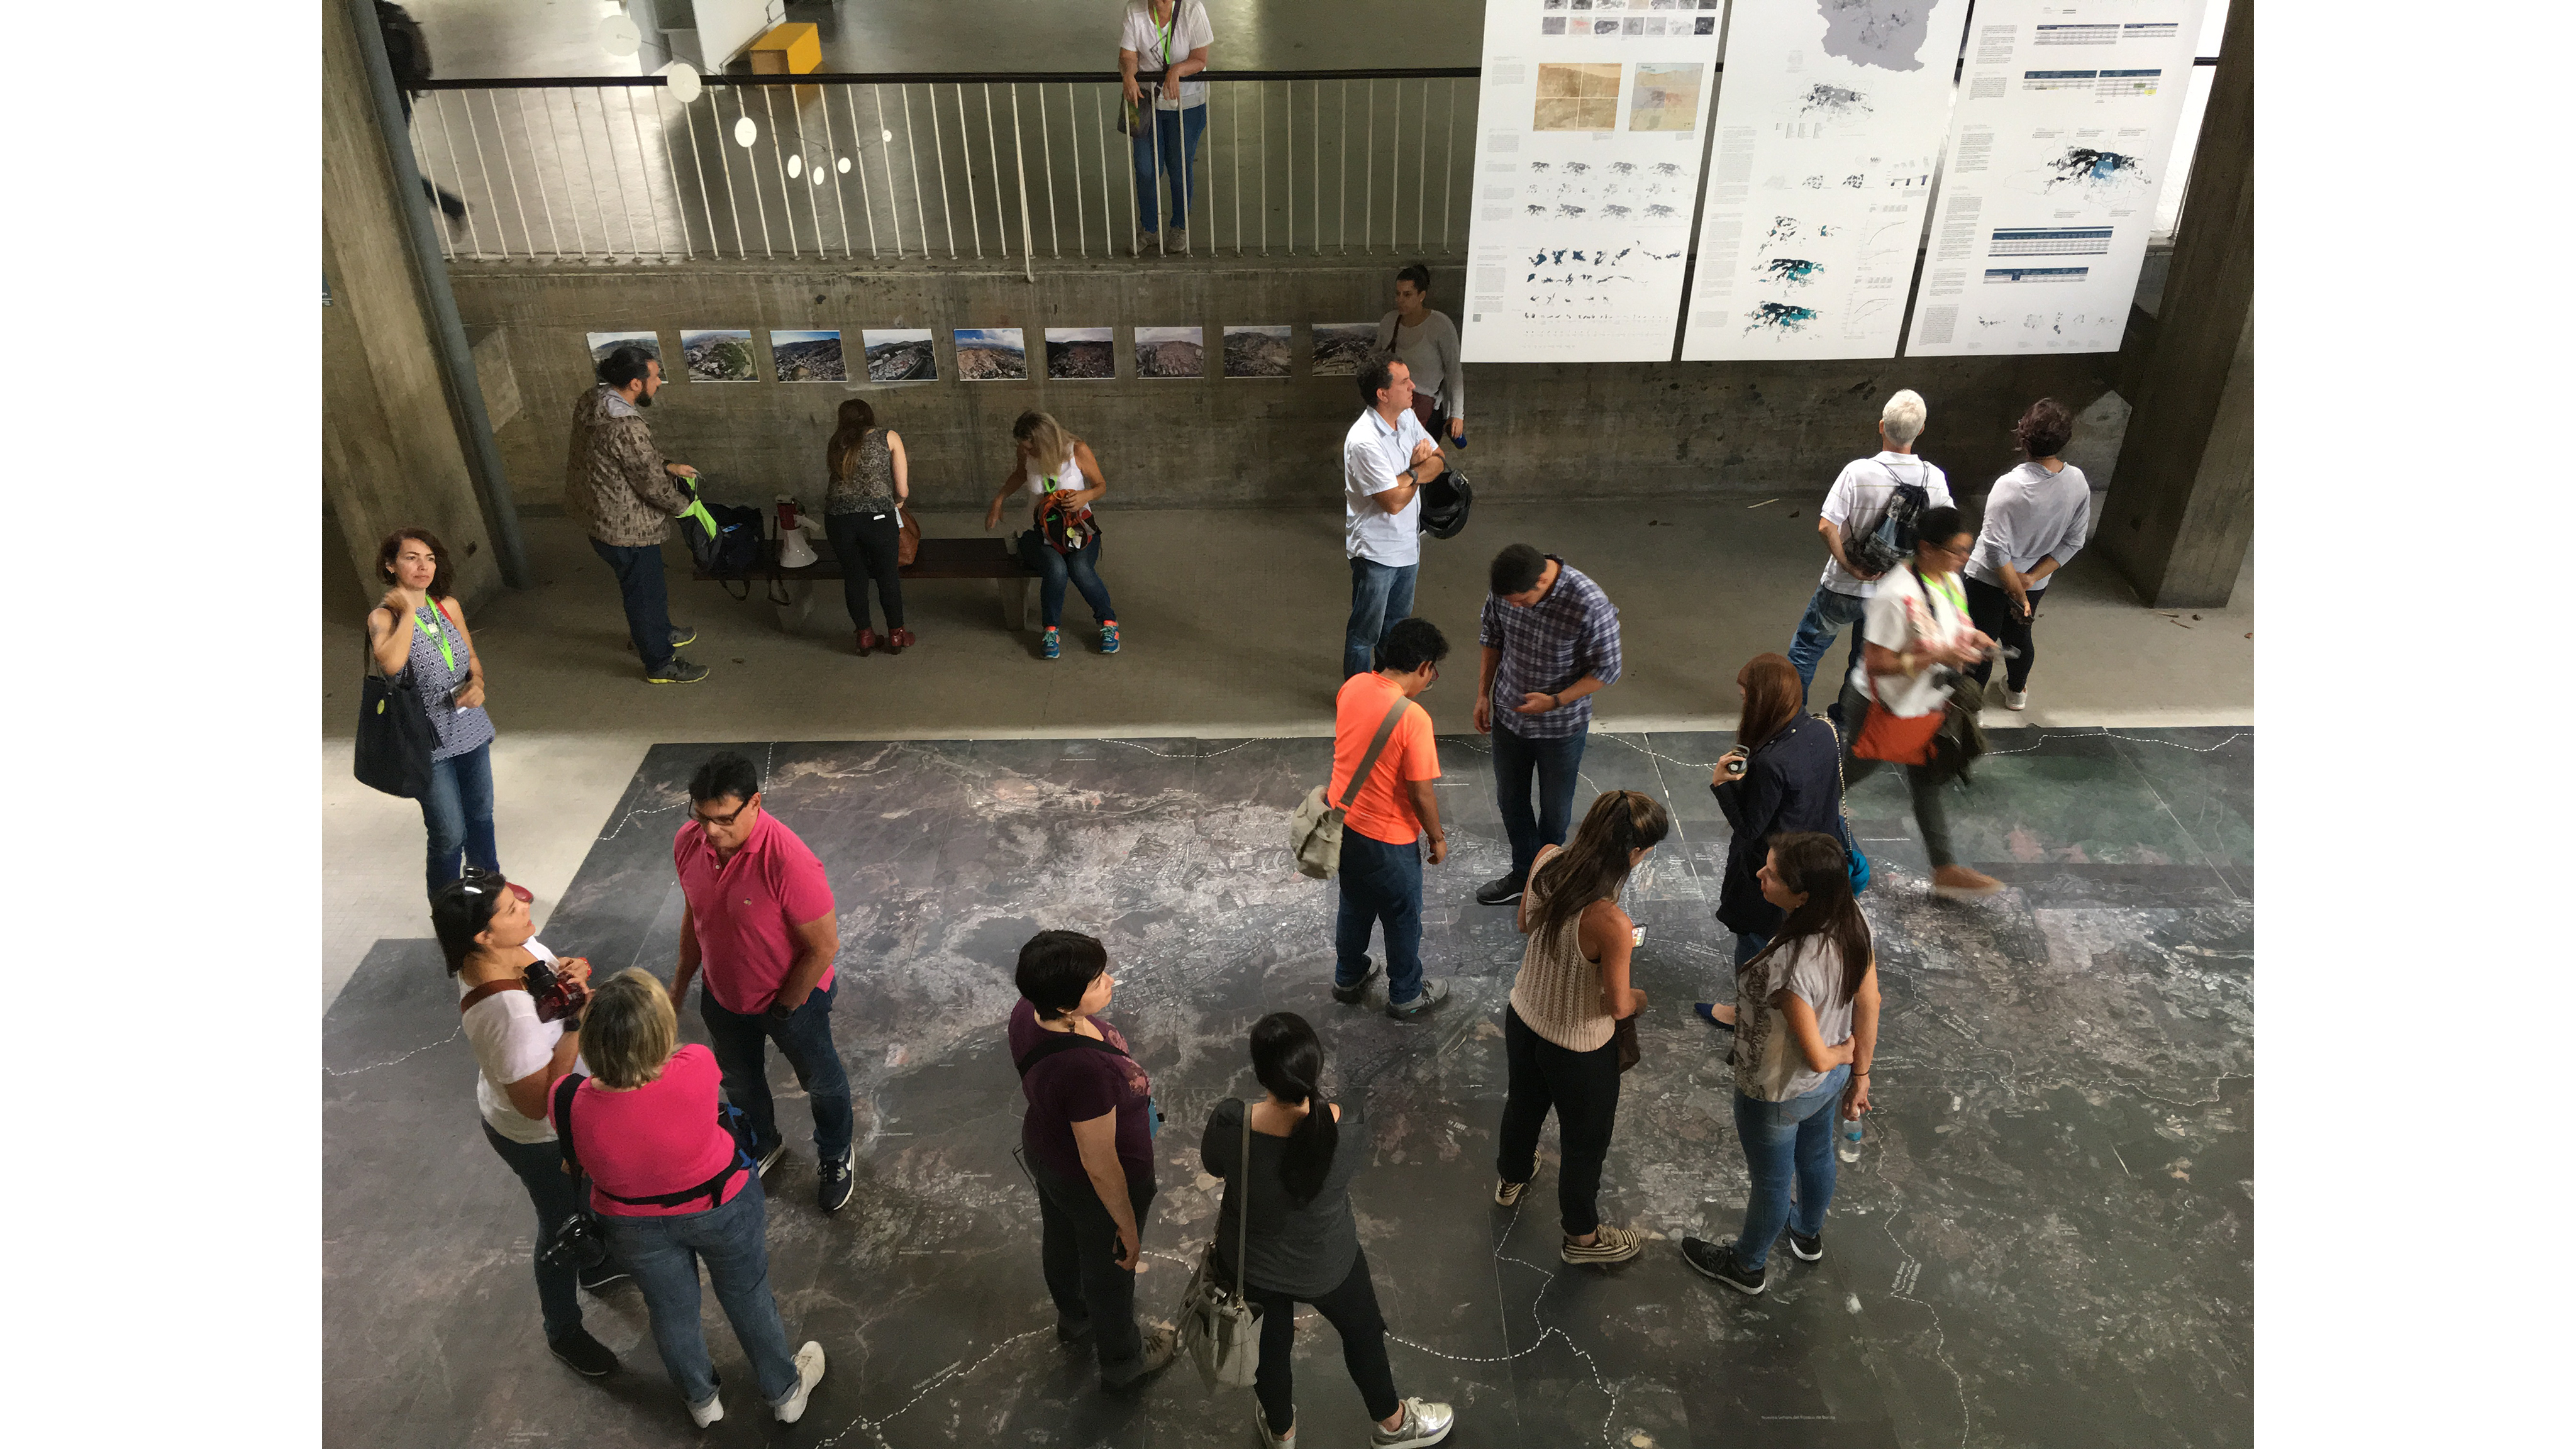 Exhibition “Caracas in Three Times” at the FAU UCV